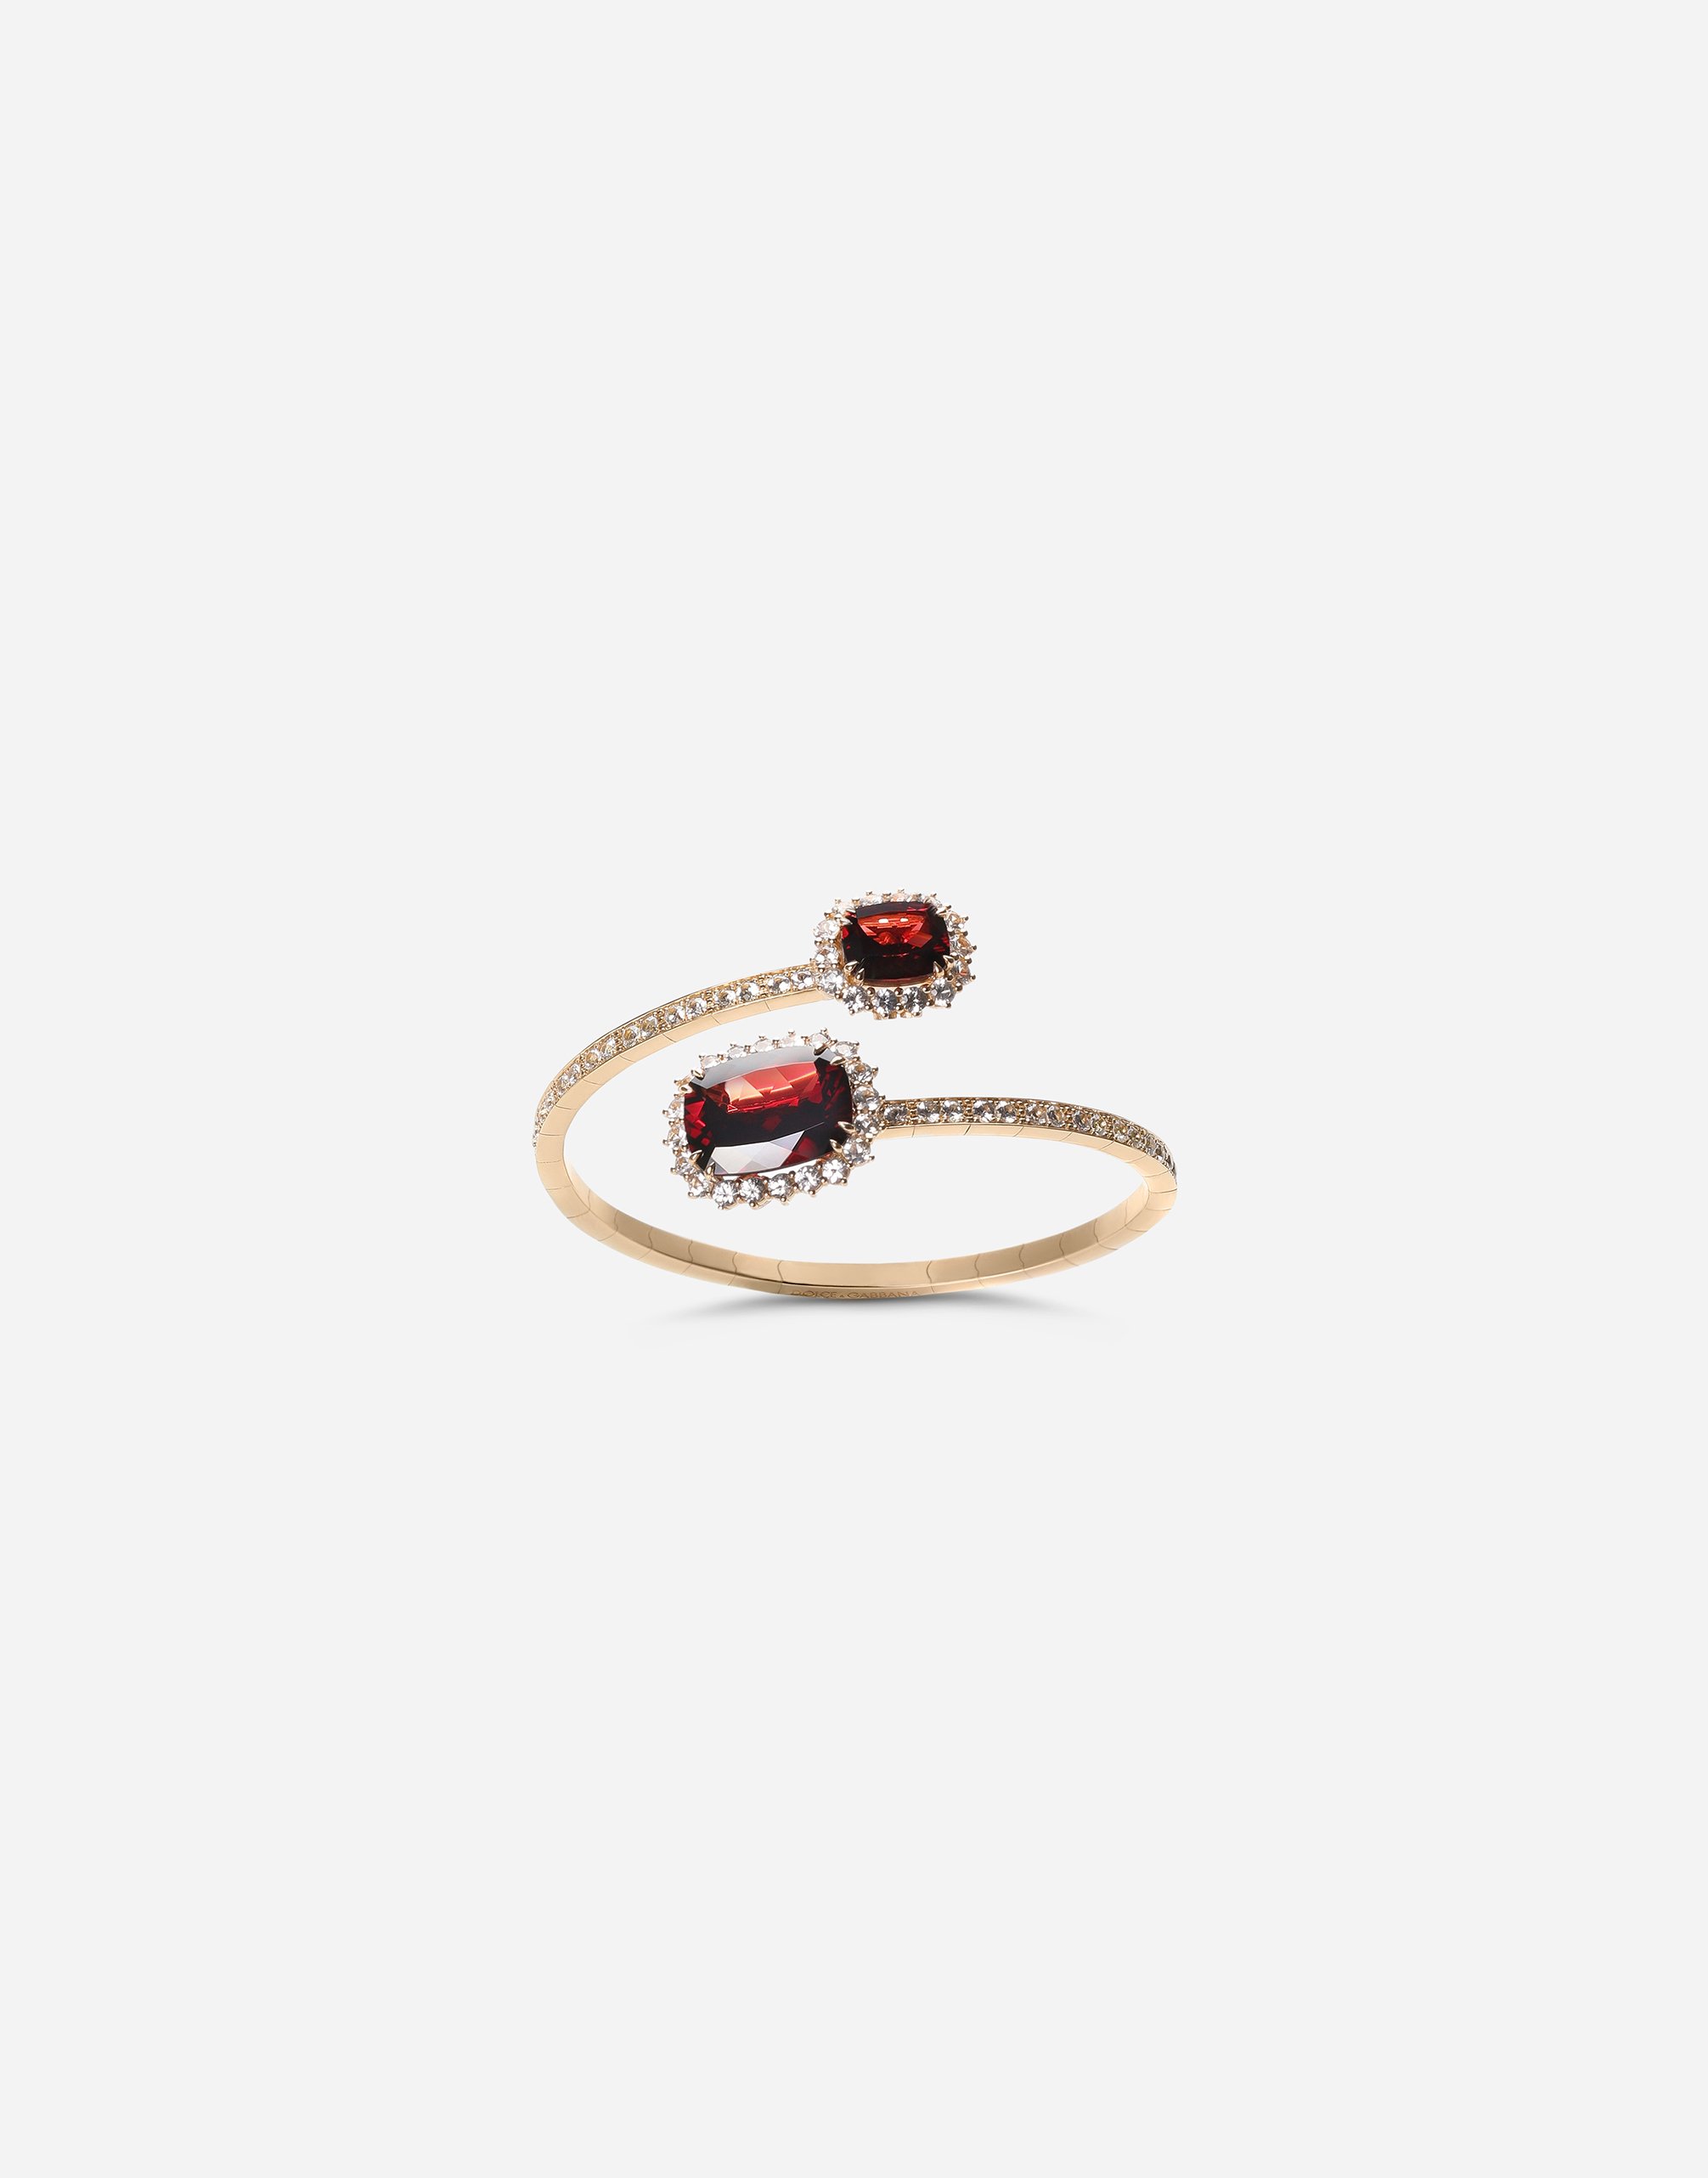 Heritage yellow gold bracelet with rodolith garnet and colourless sapphire in Gold